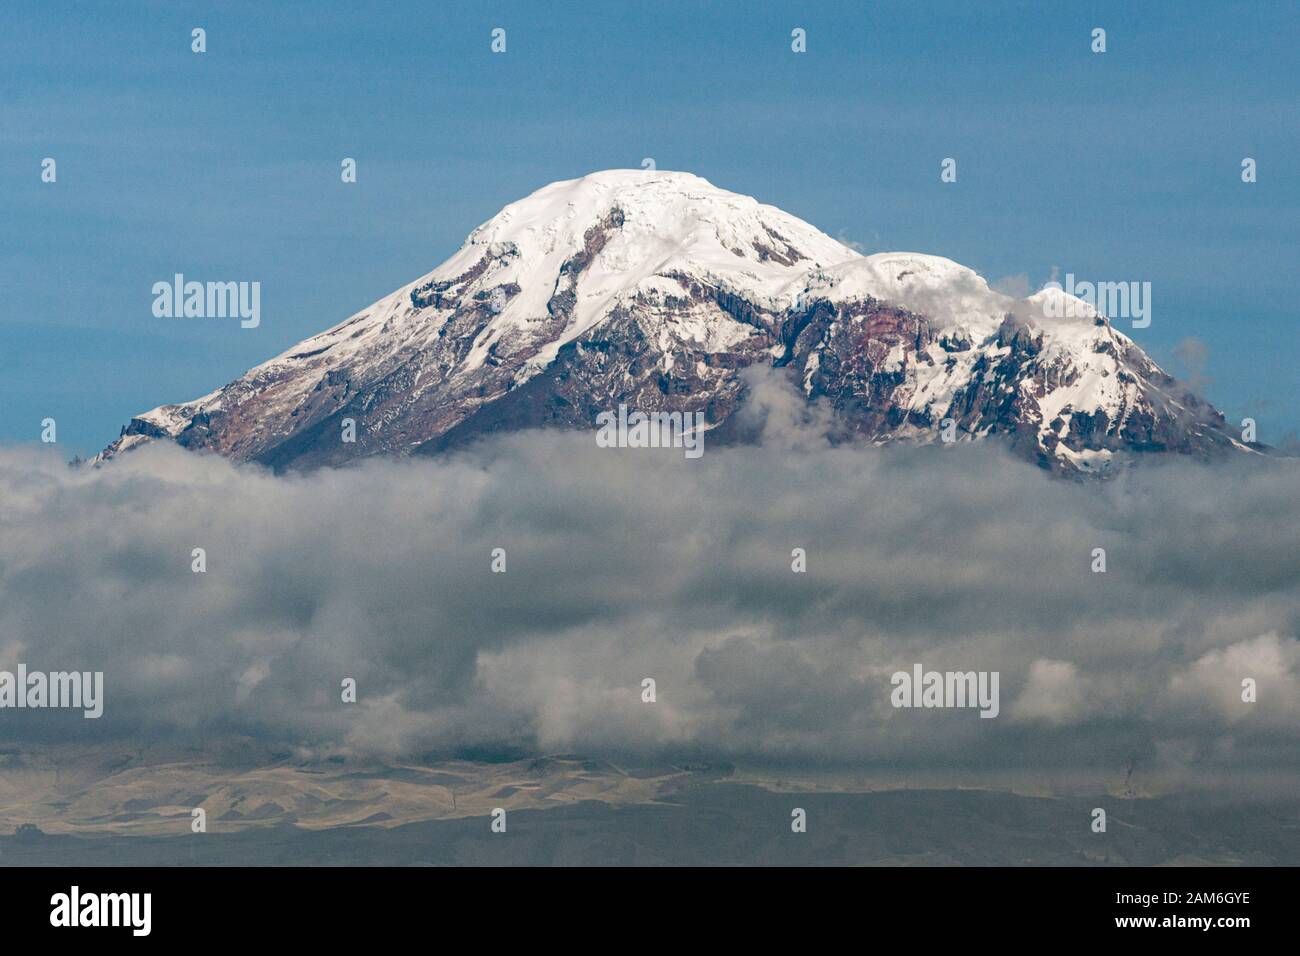 Mount Chimborazo volcano (6268m), the highest mountain in Ecuador and the highest point on Earth when measured from the centre of the Earth. Stock Photo